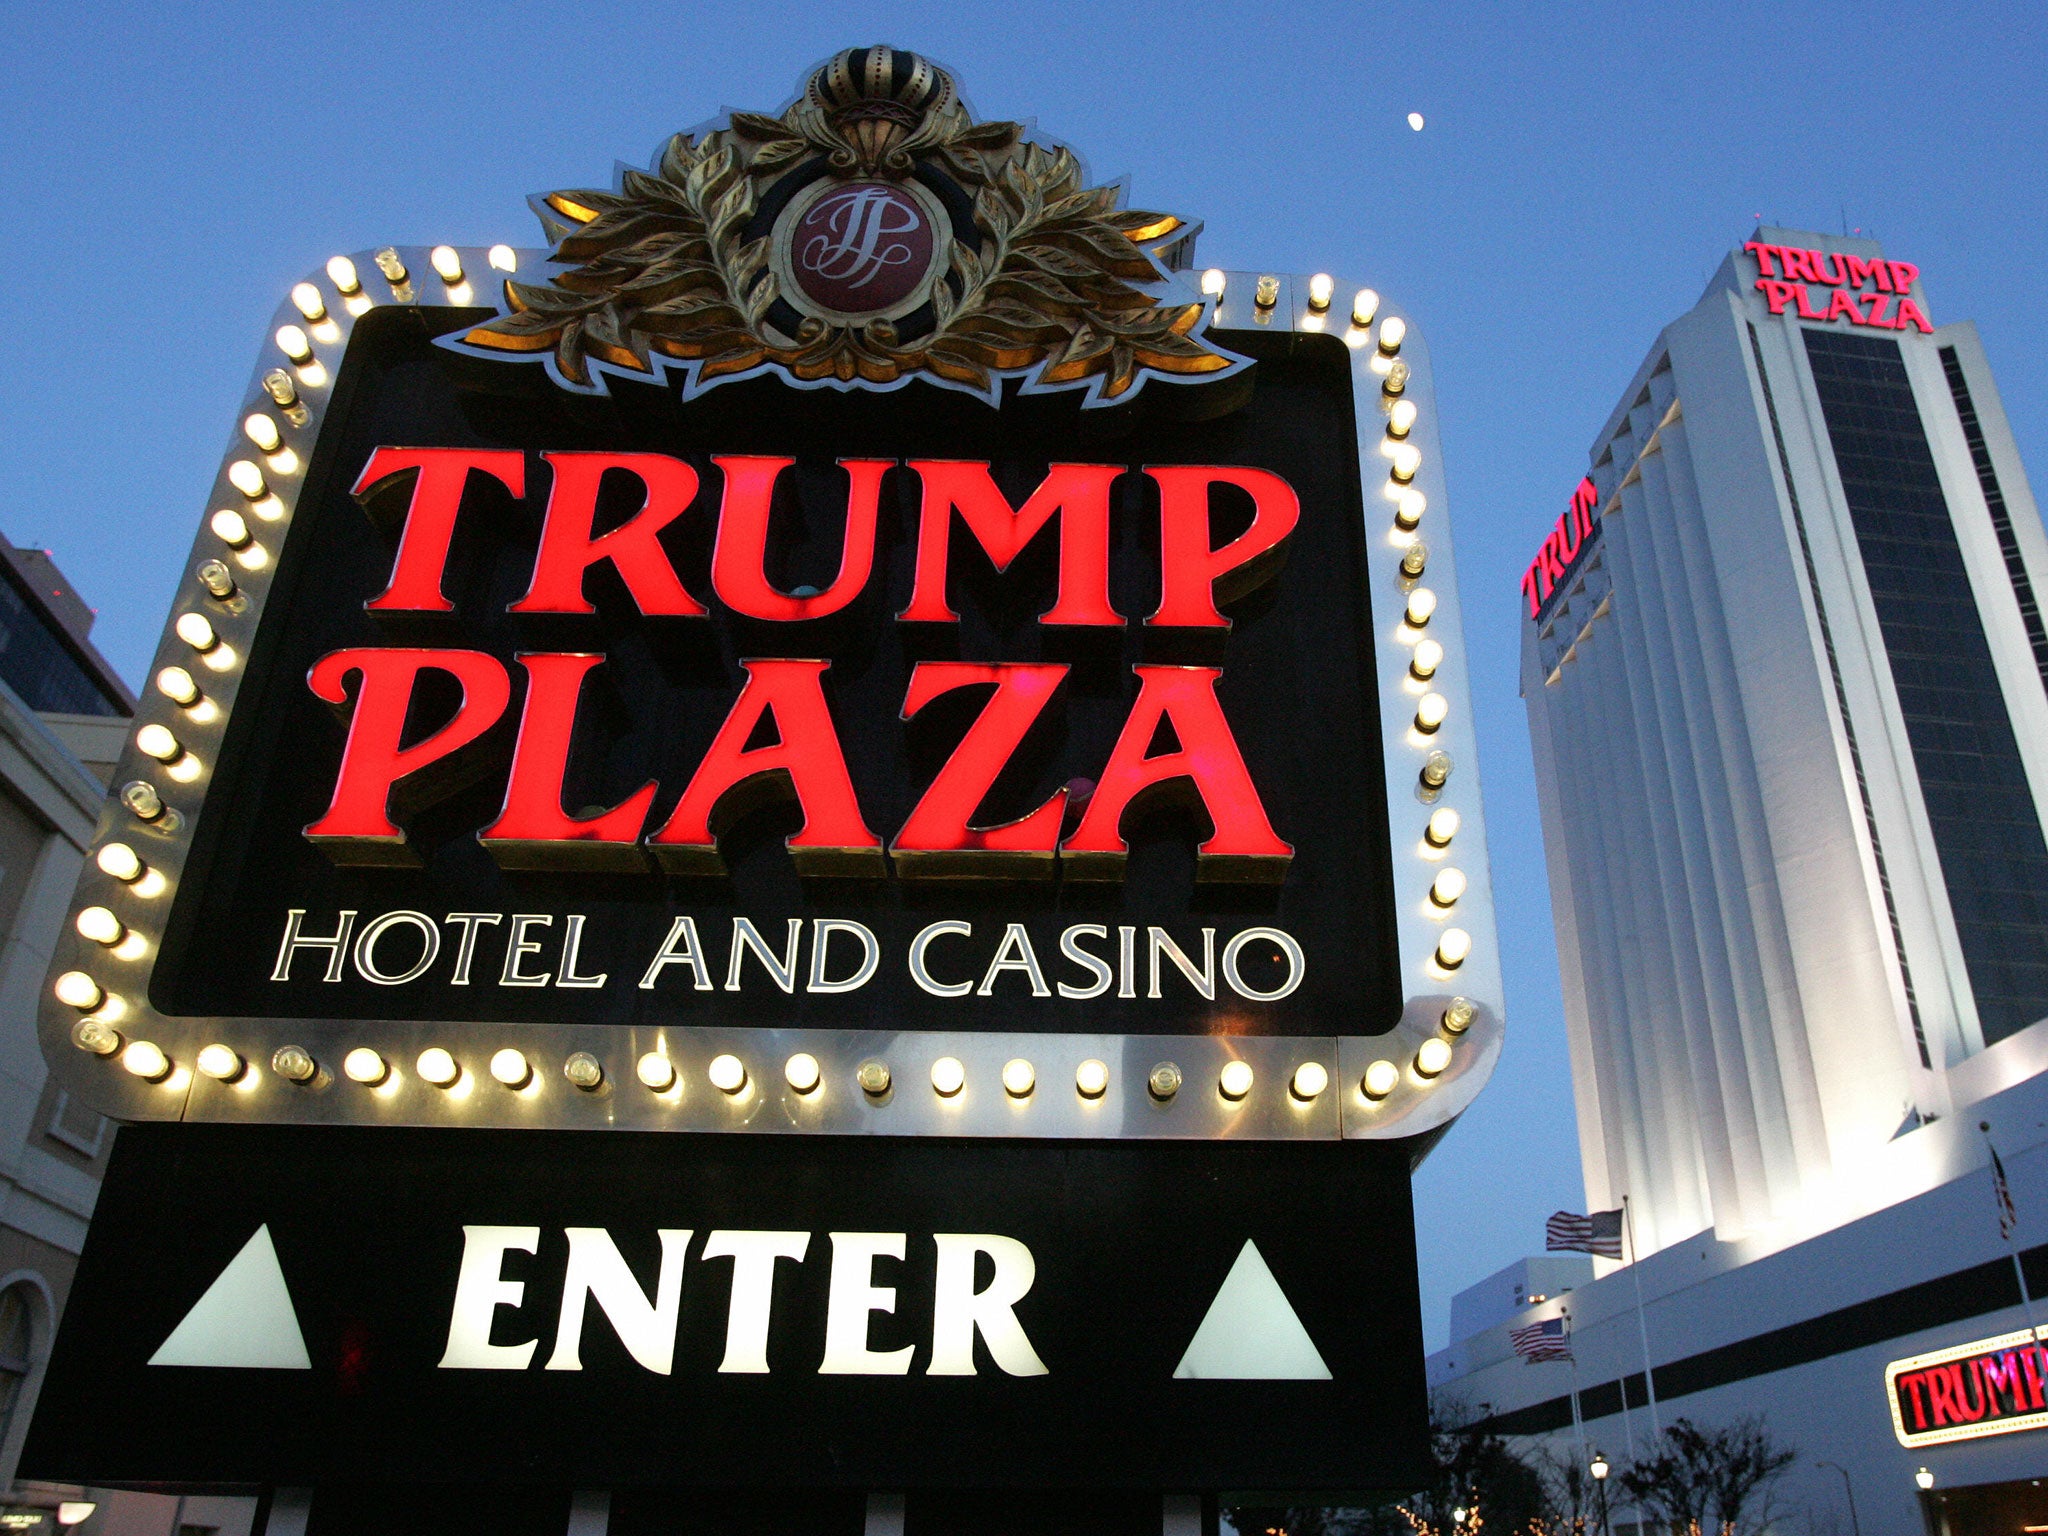 Donald Trump owns only a small stake in the Trump Plaza Hotel and Casino’s parent company in Atlantic City, New Jersey